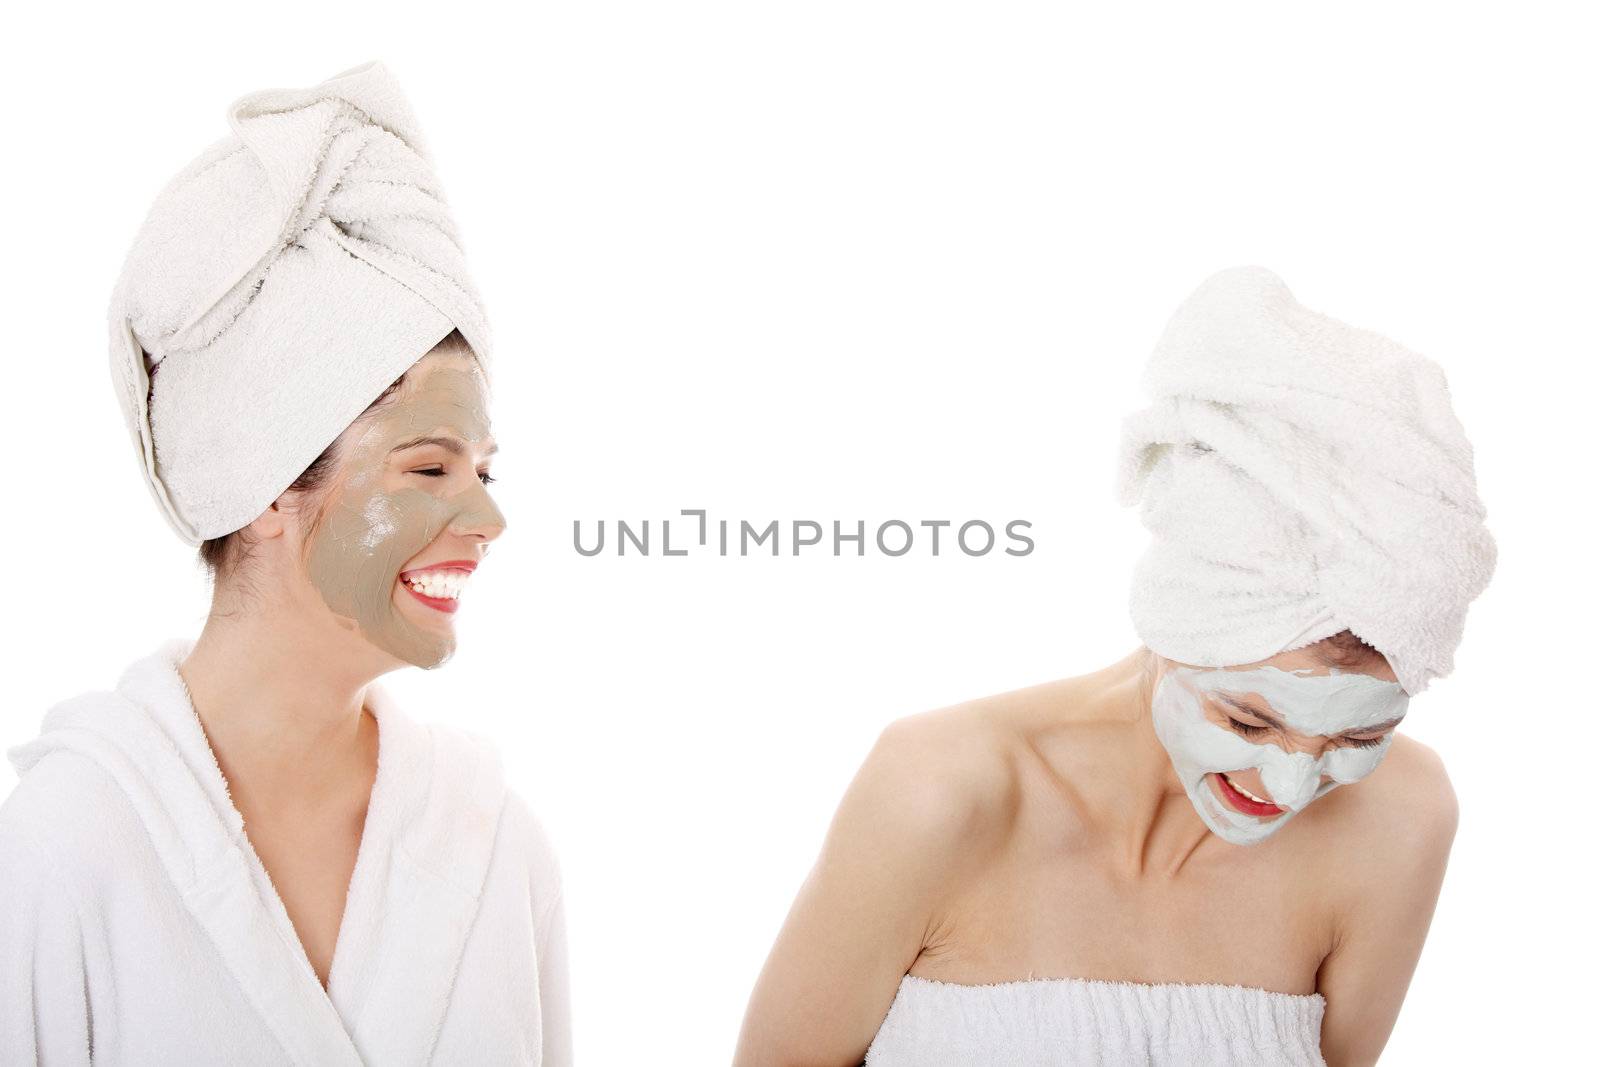 Young happy women with facial clay mask , isolated on white